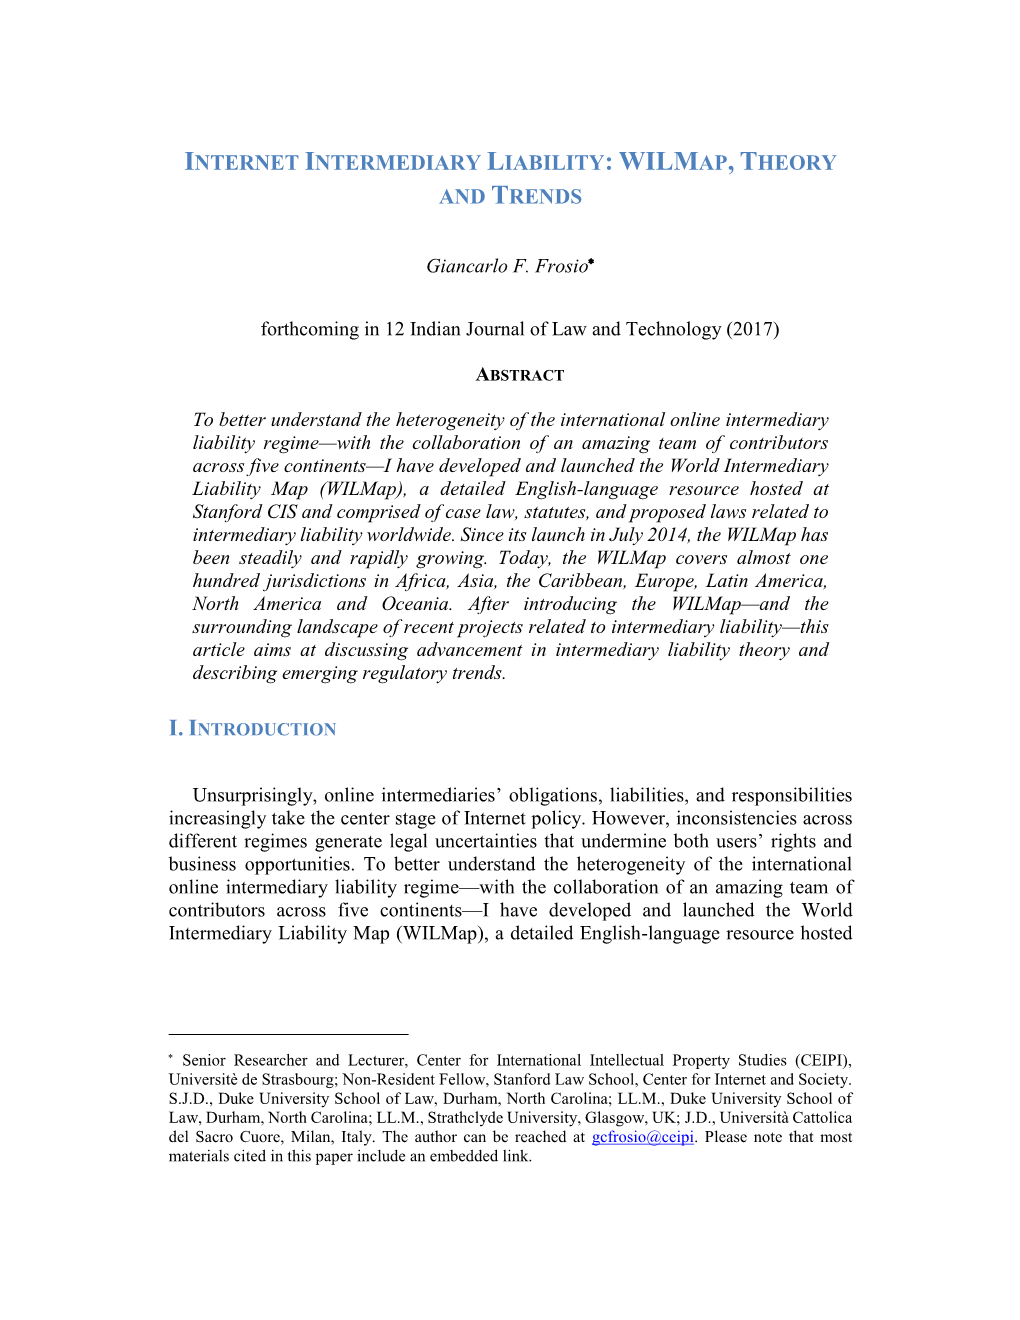 Internet Intermediary Liability: Wilmap, Theory and Trends